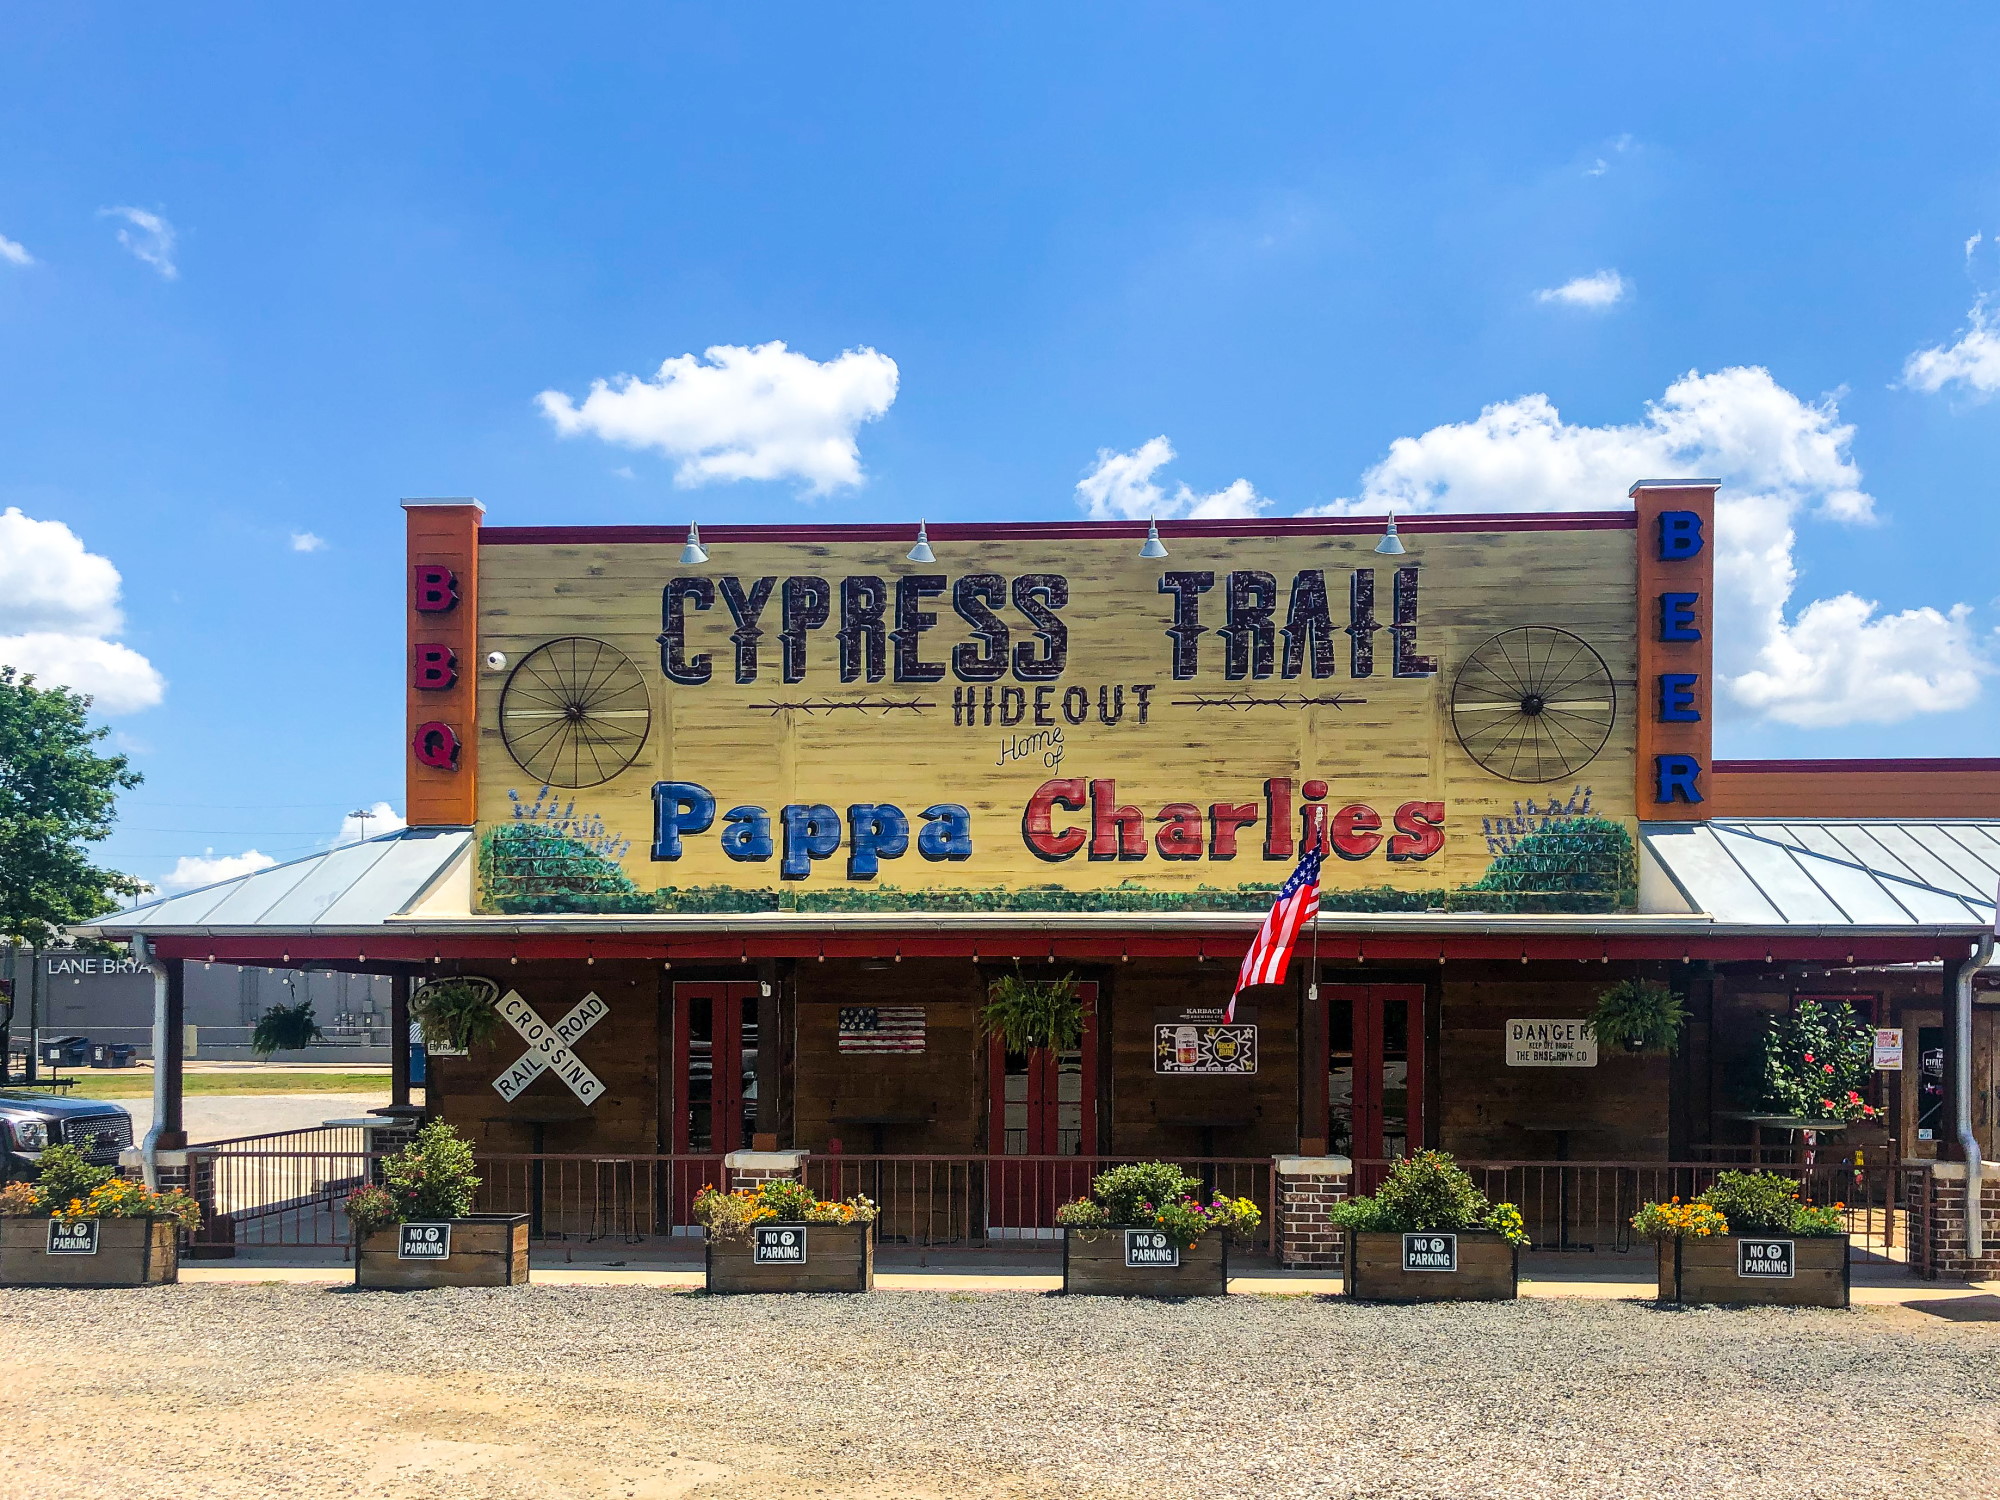 Pappa Charlies Barbecue at Cypress Trail Hideout